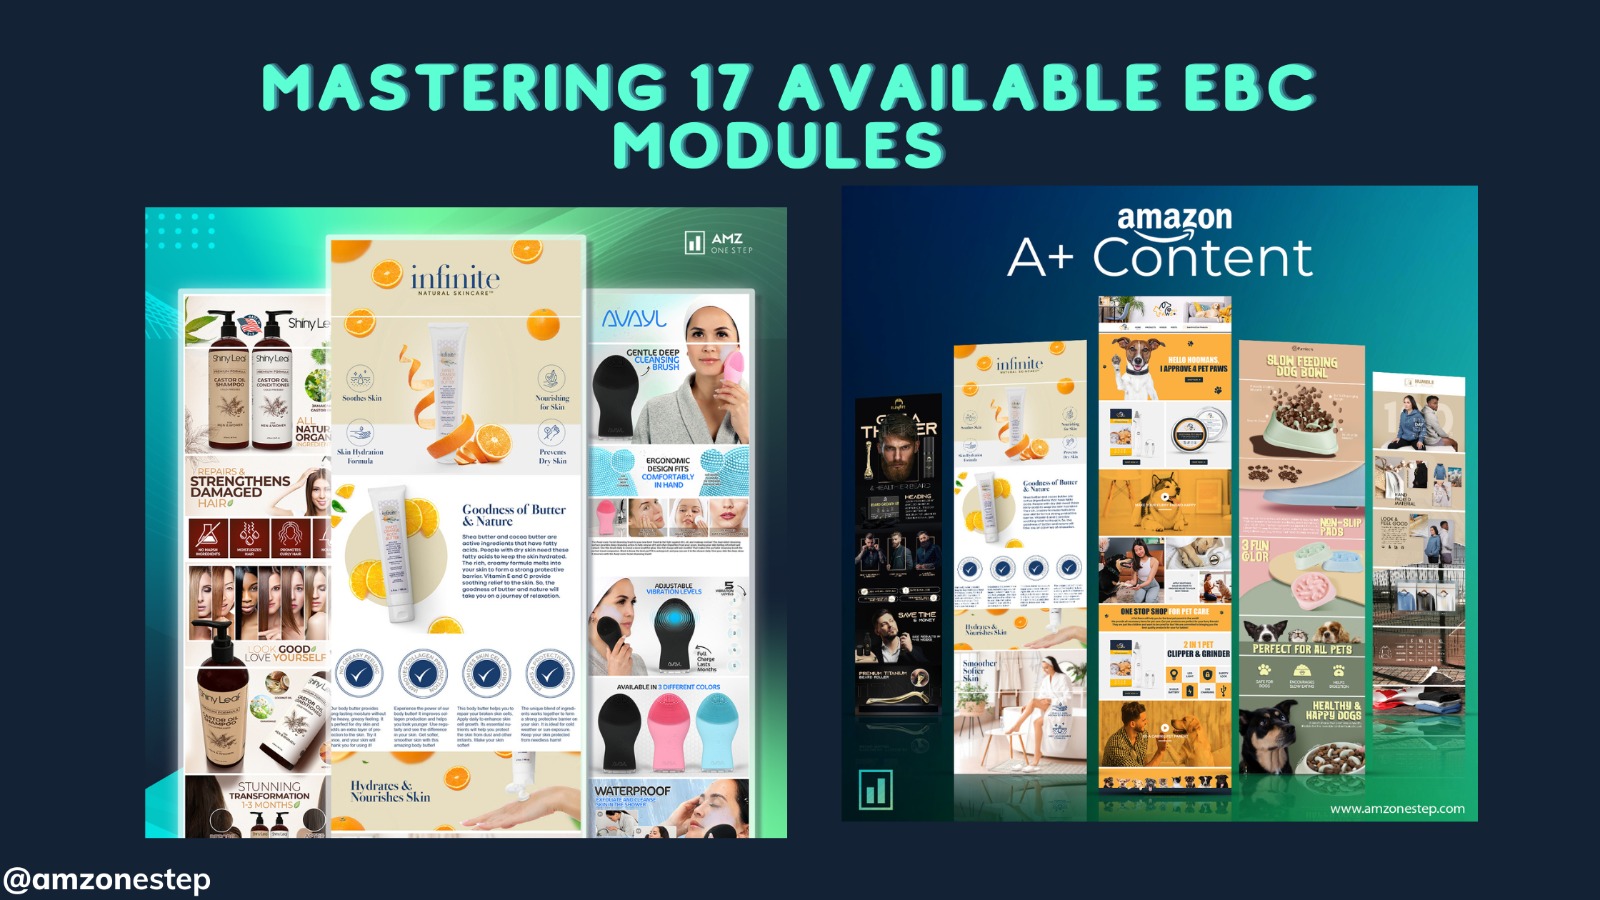 Mastering 17 Available EBC Modules to Provide an Enhanced Customer Experience